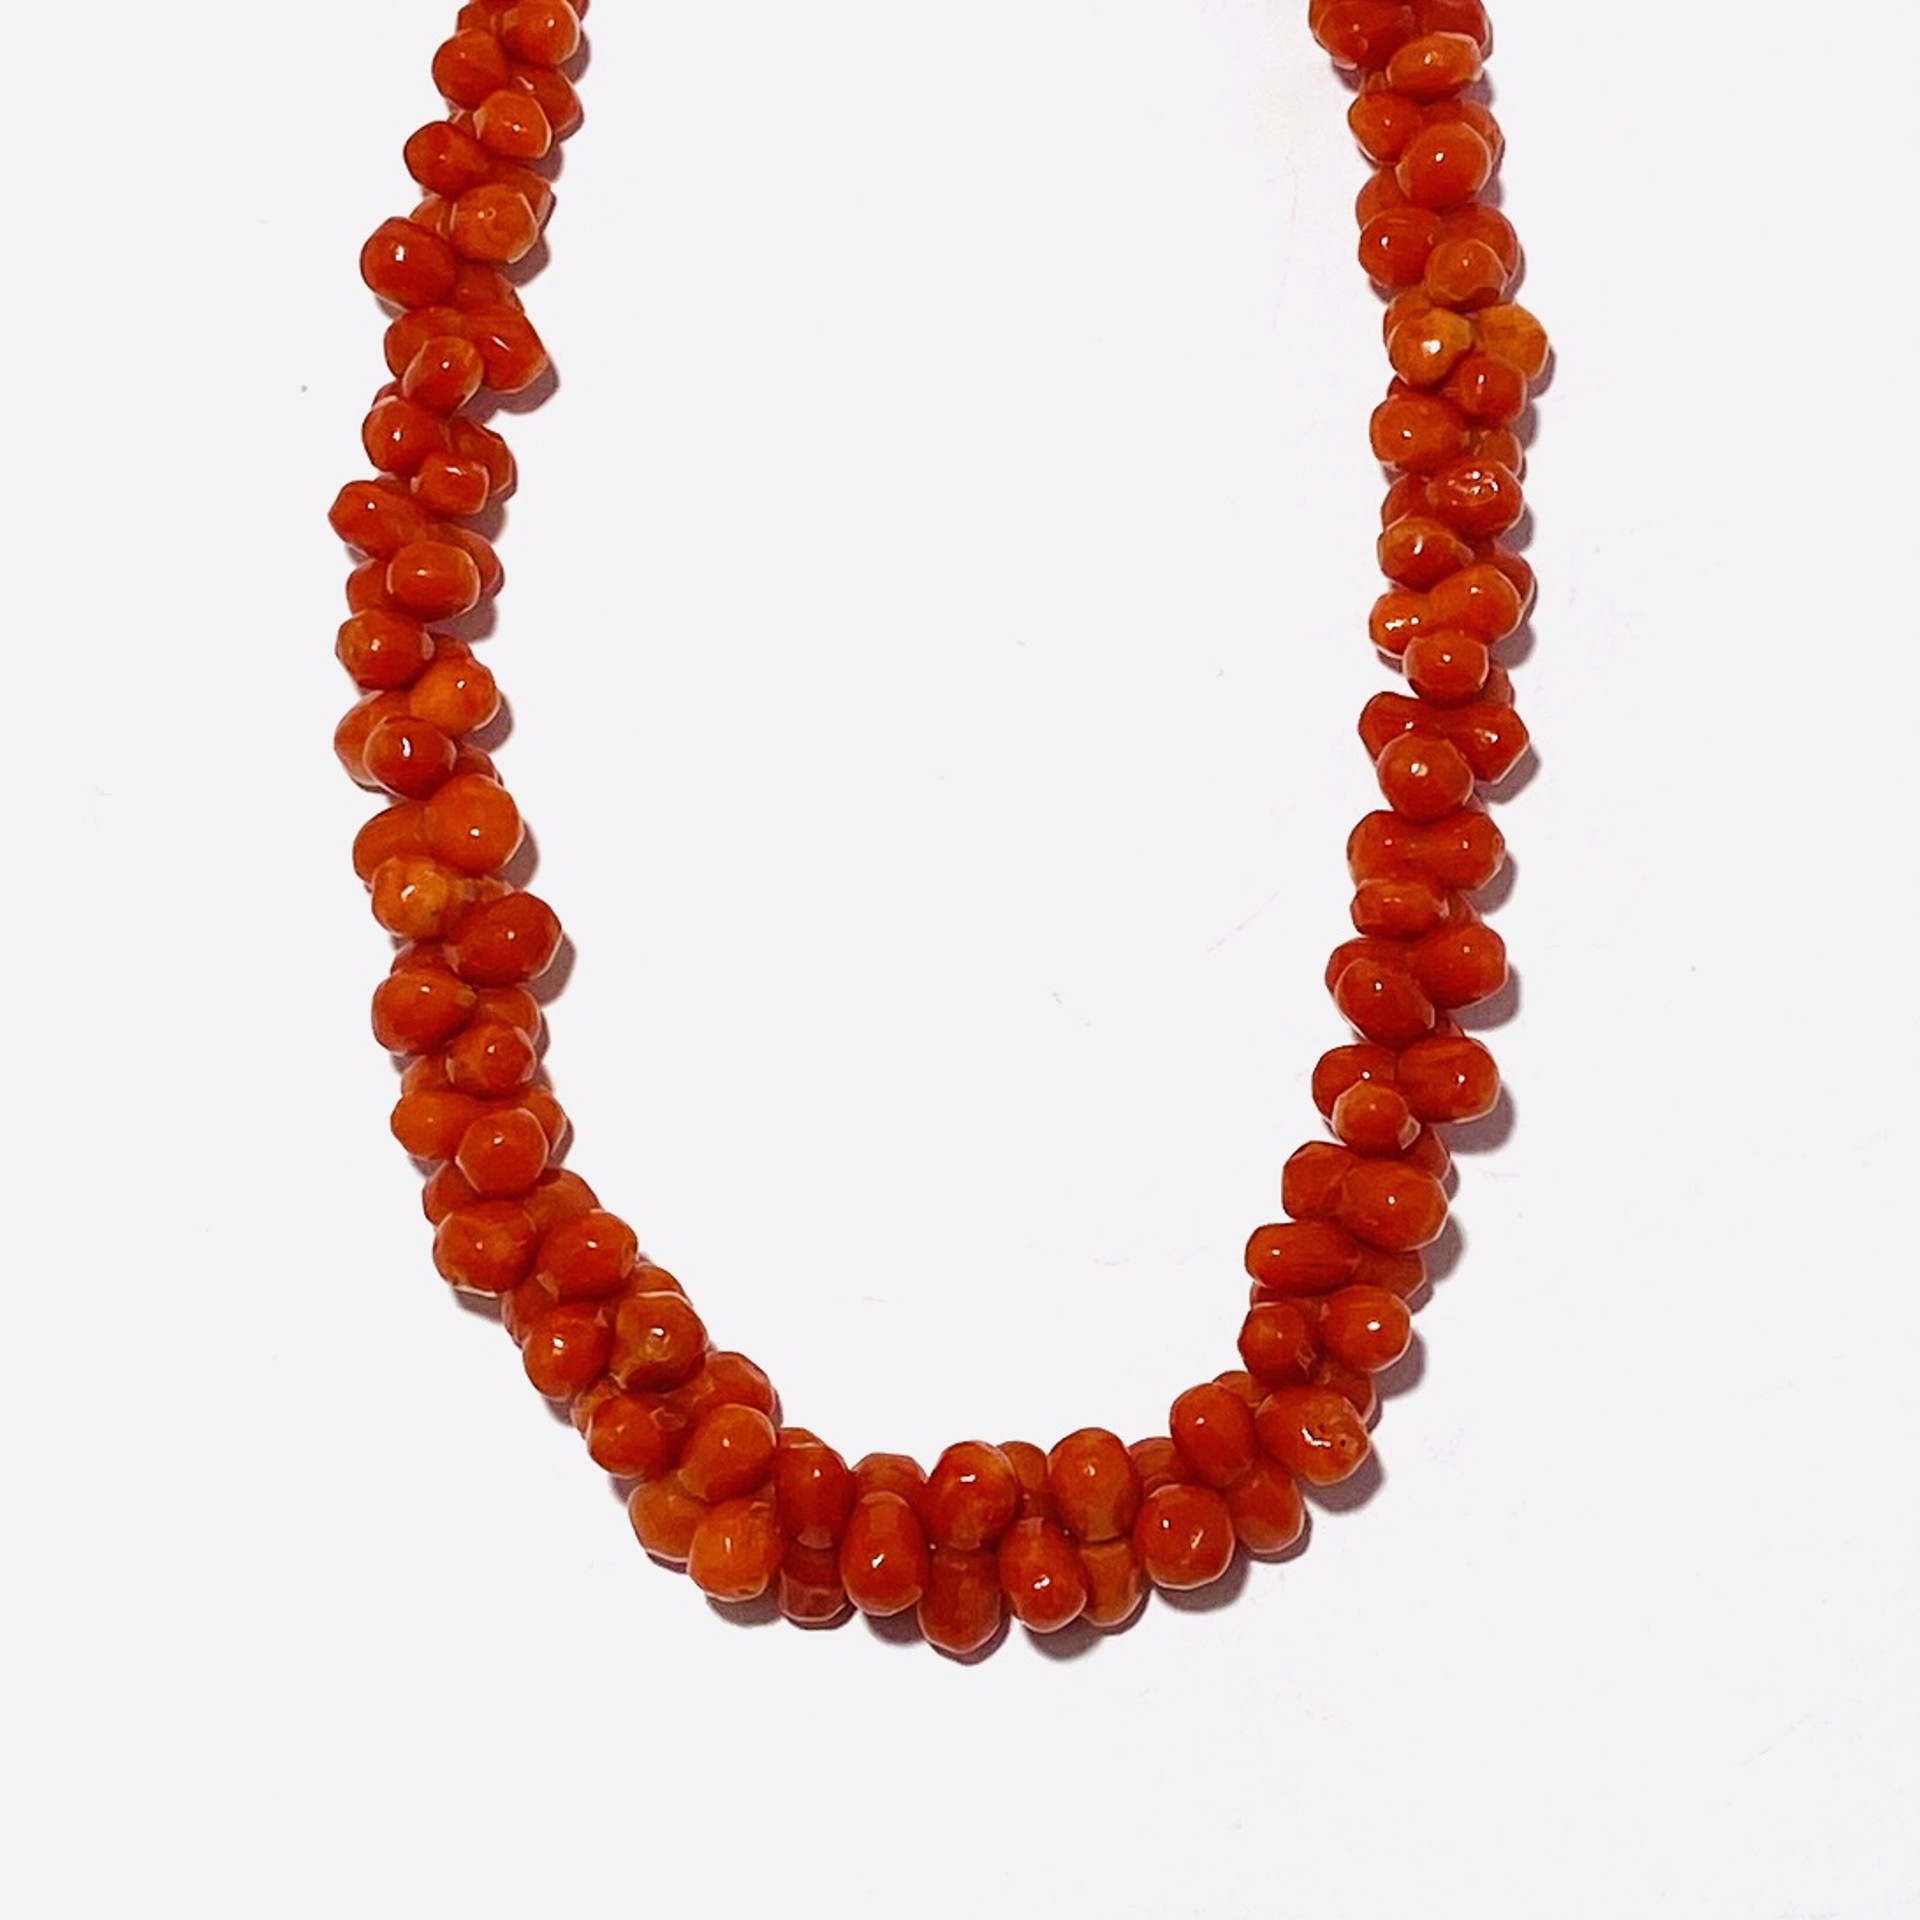 Double Strand Red Vintage Coral Necklace NT22-92 by Nance Trueworthy